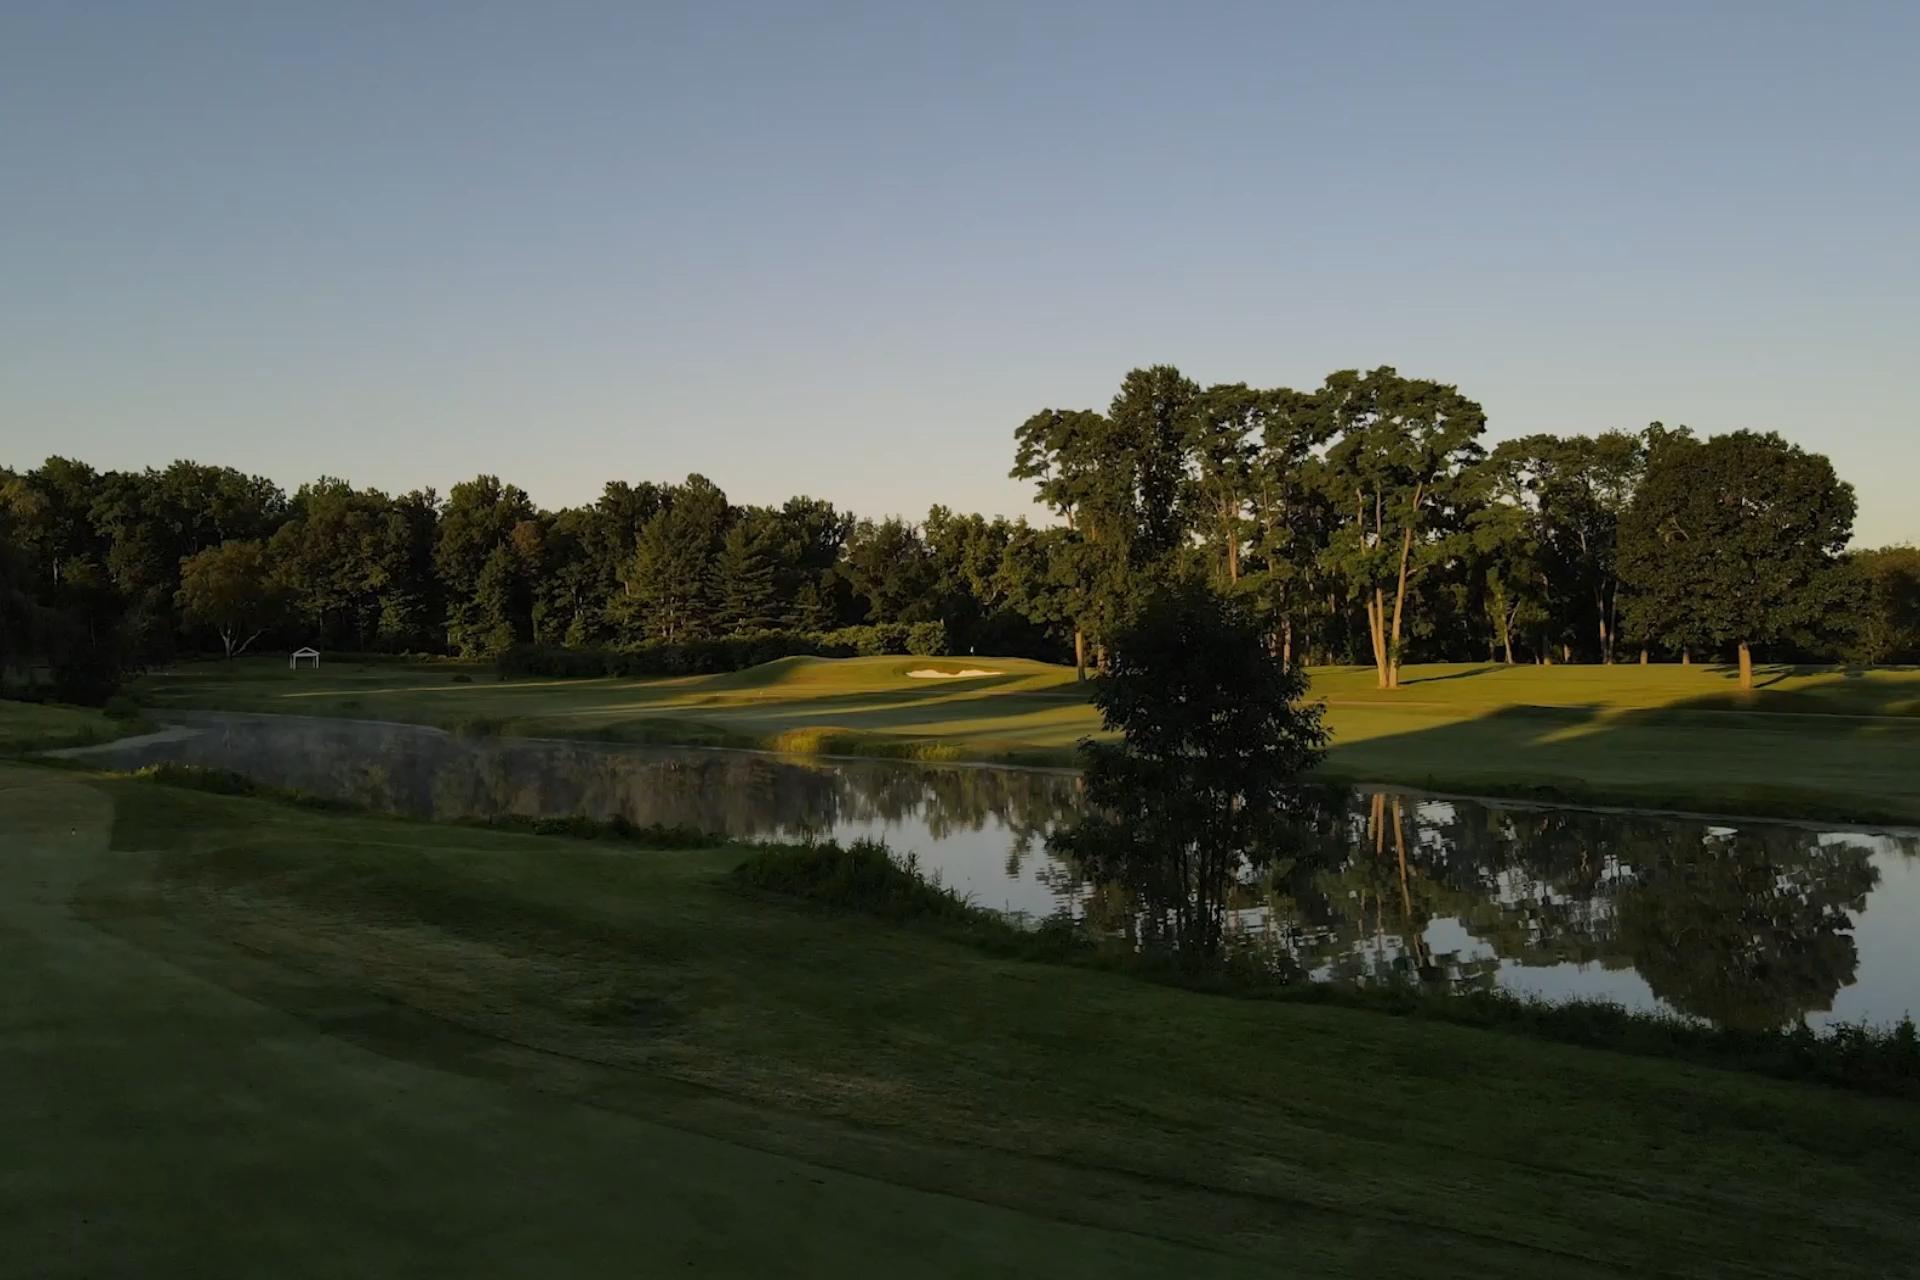 dusk view of country club fairway and hole